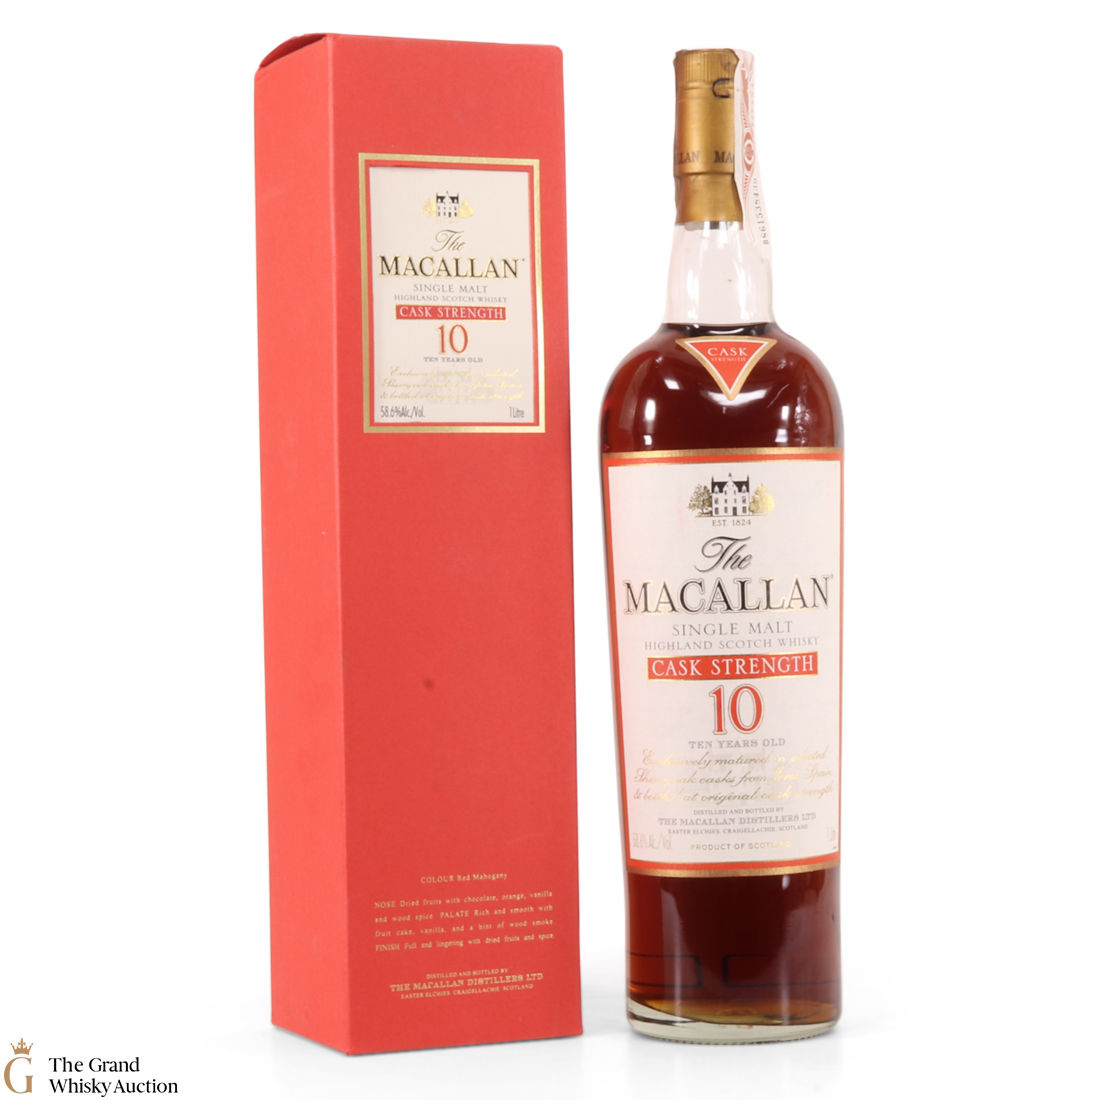 Macallan 10 Year Old Cask Strength 1 Litre 58 6 Auction The Grand Whisky Auction